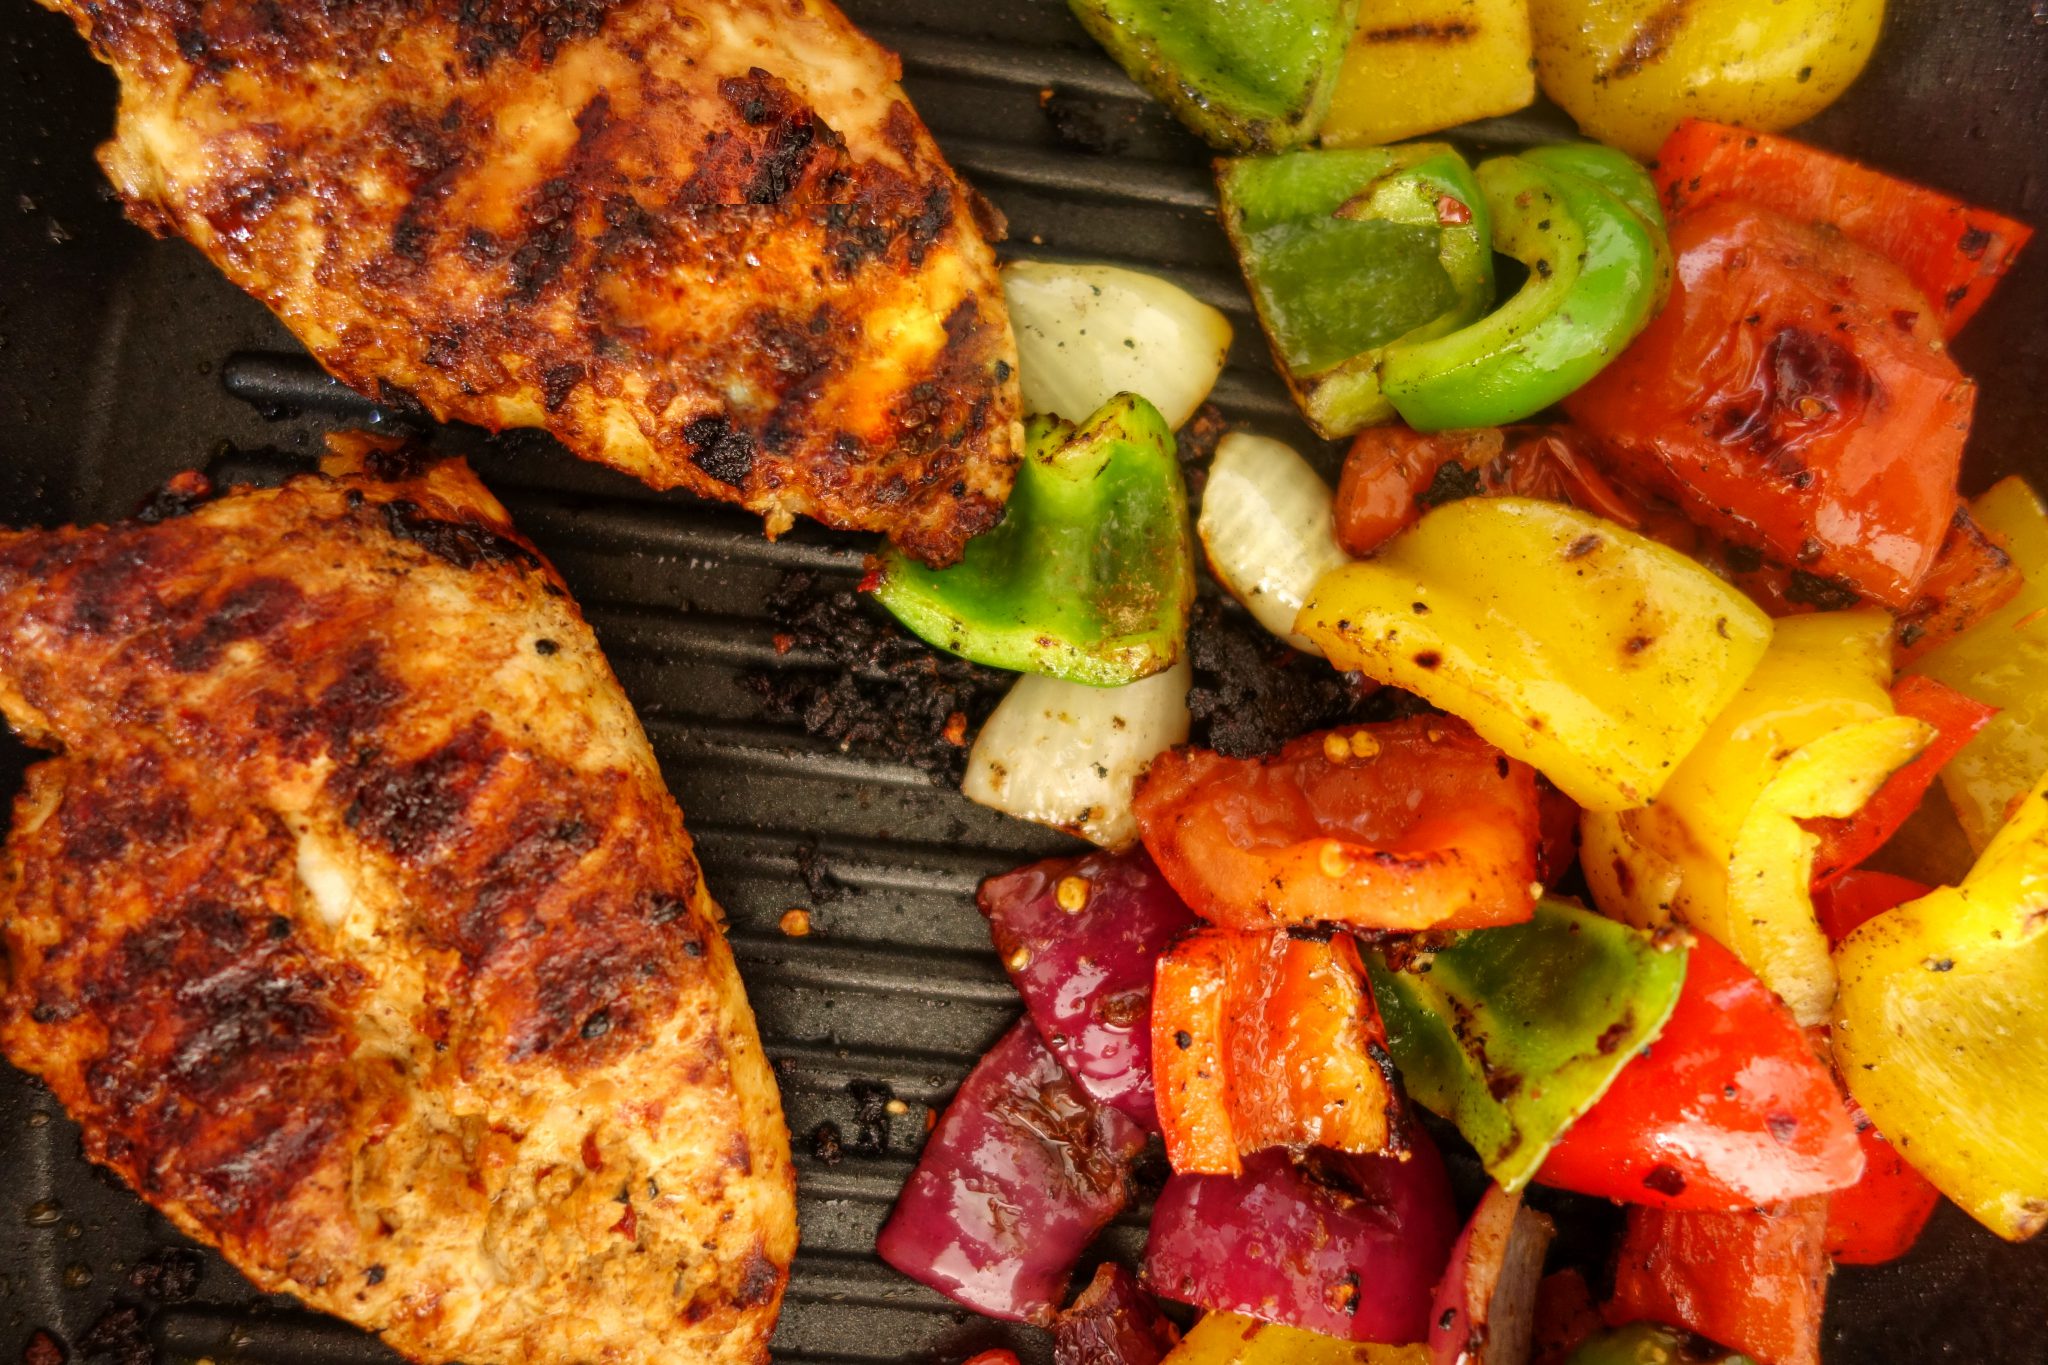 Refrain noun evolution Grilled Chicken and Veggies recipe – From bowl to soul